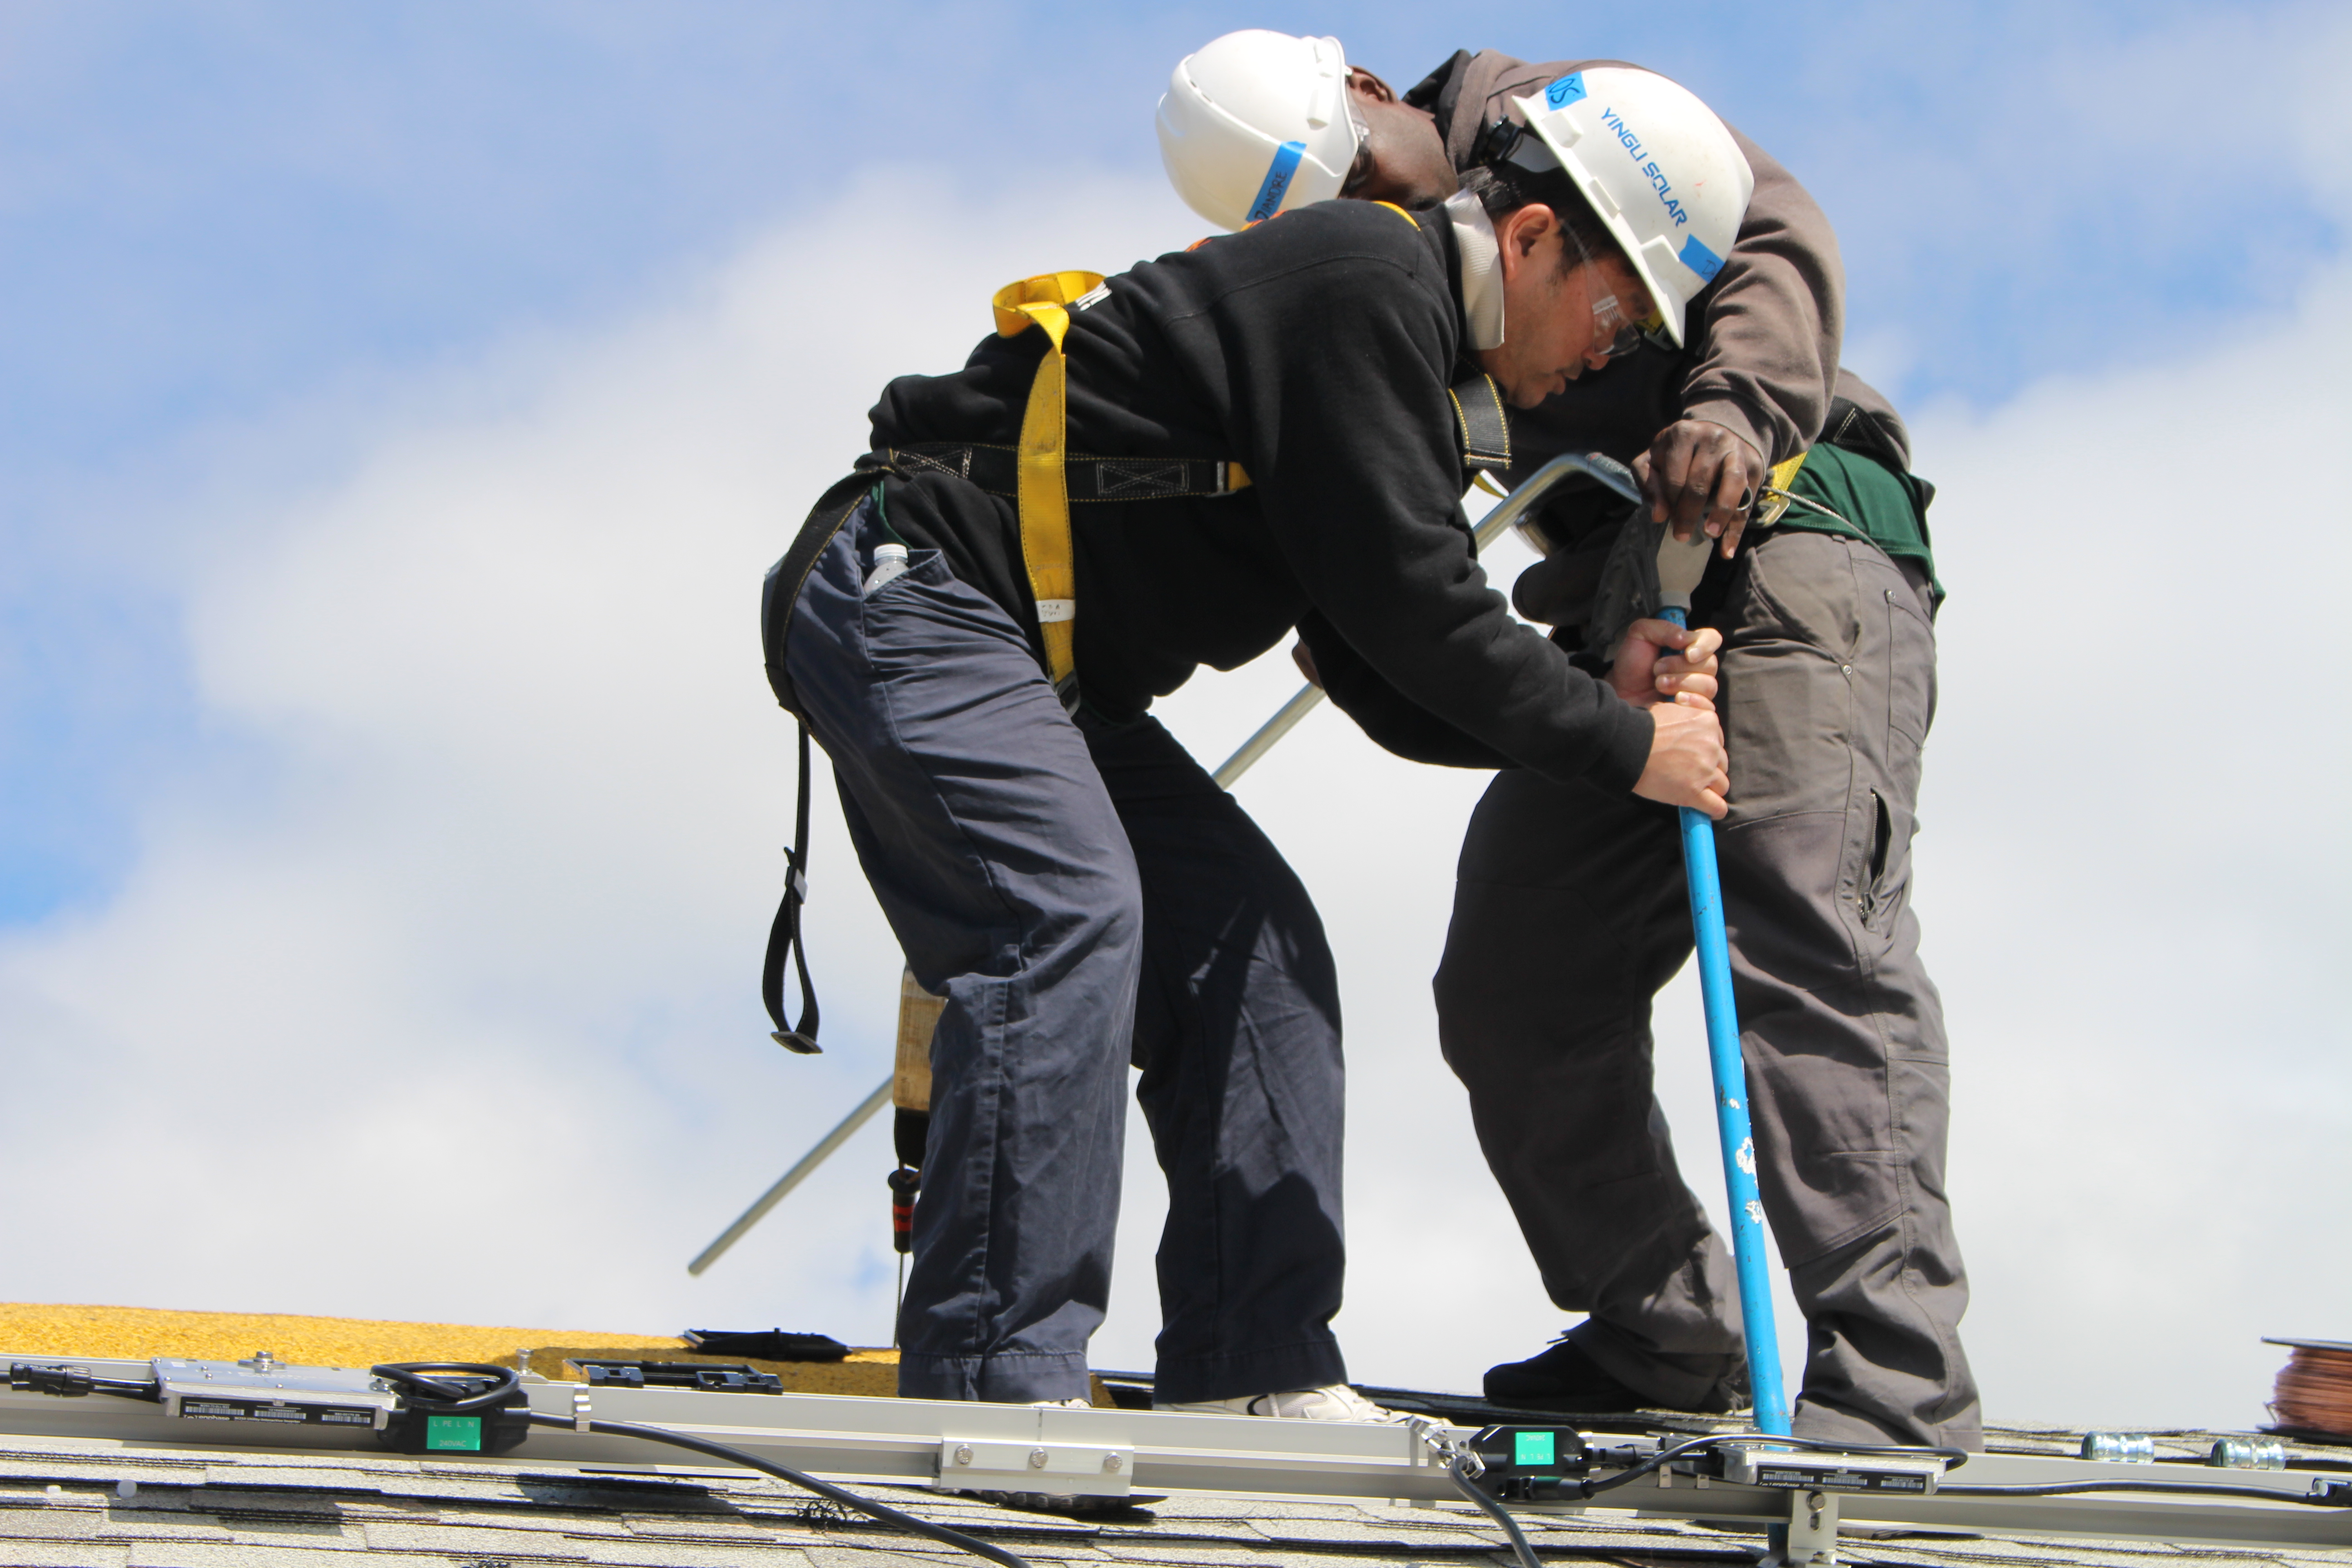 Two men in hard hats standing on a roof, installling solar panel hardward.